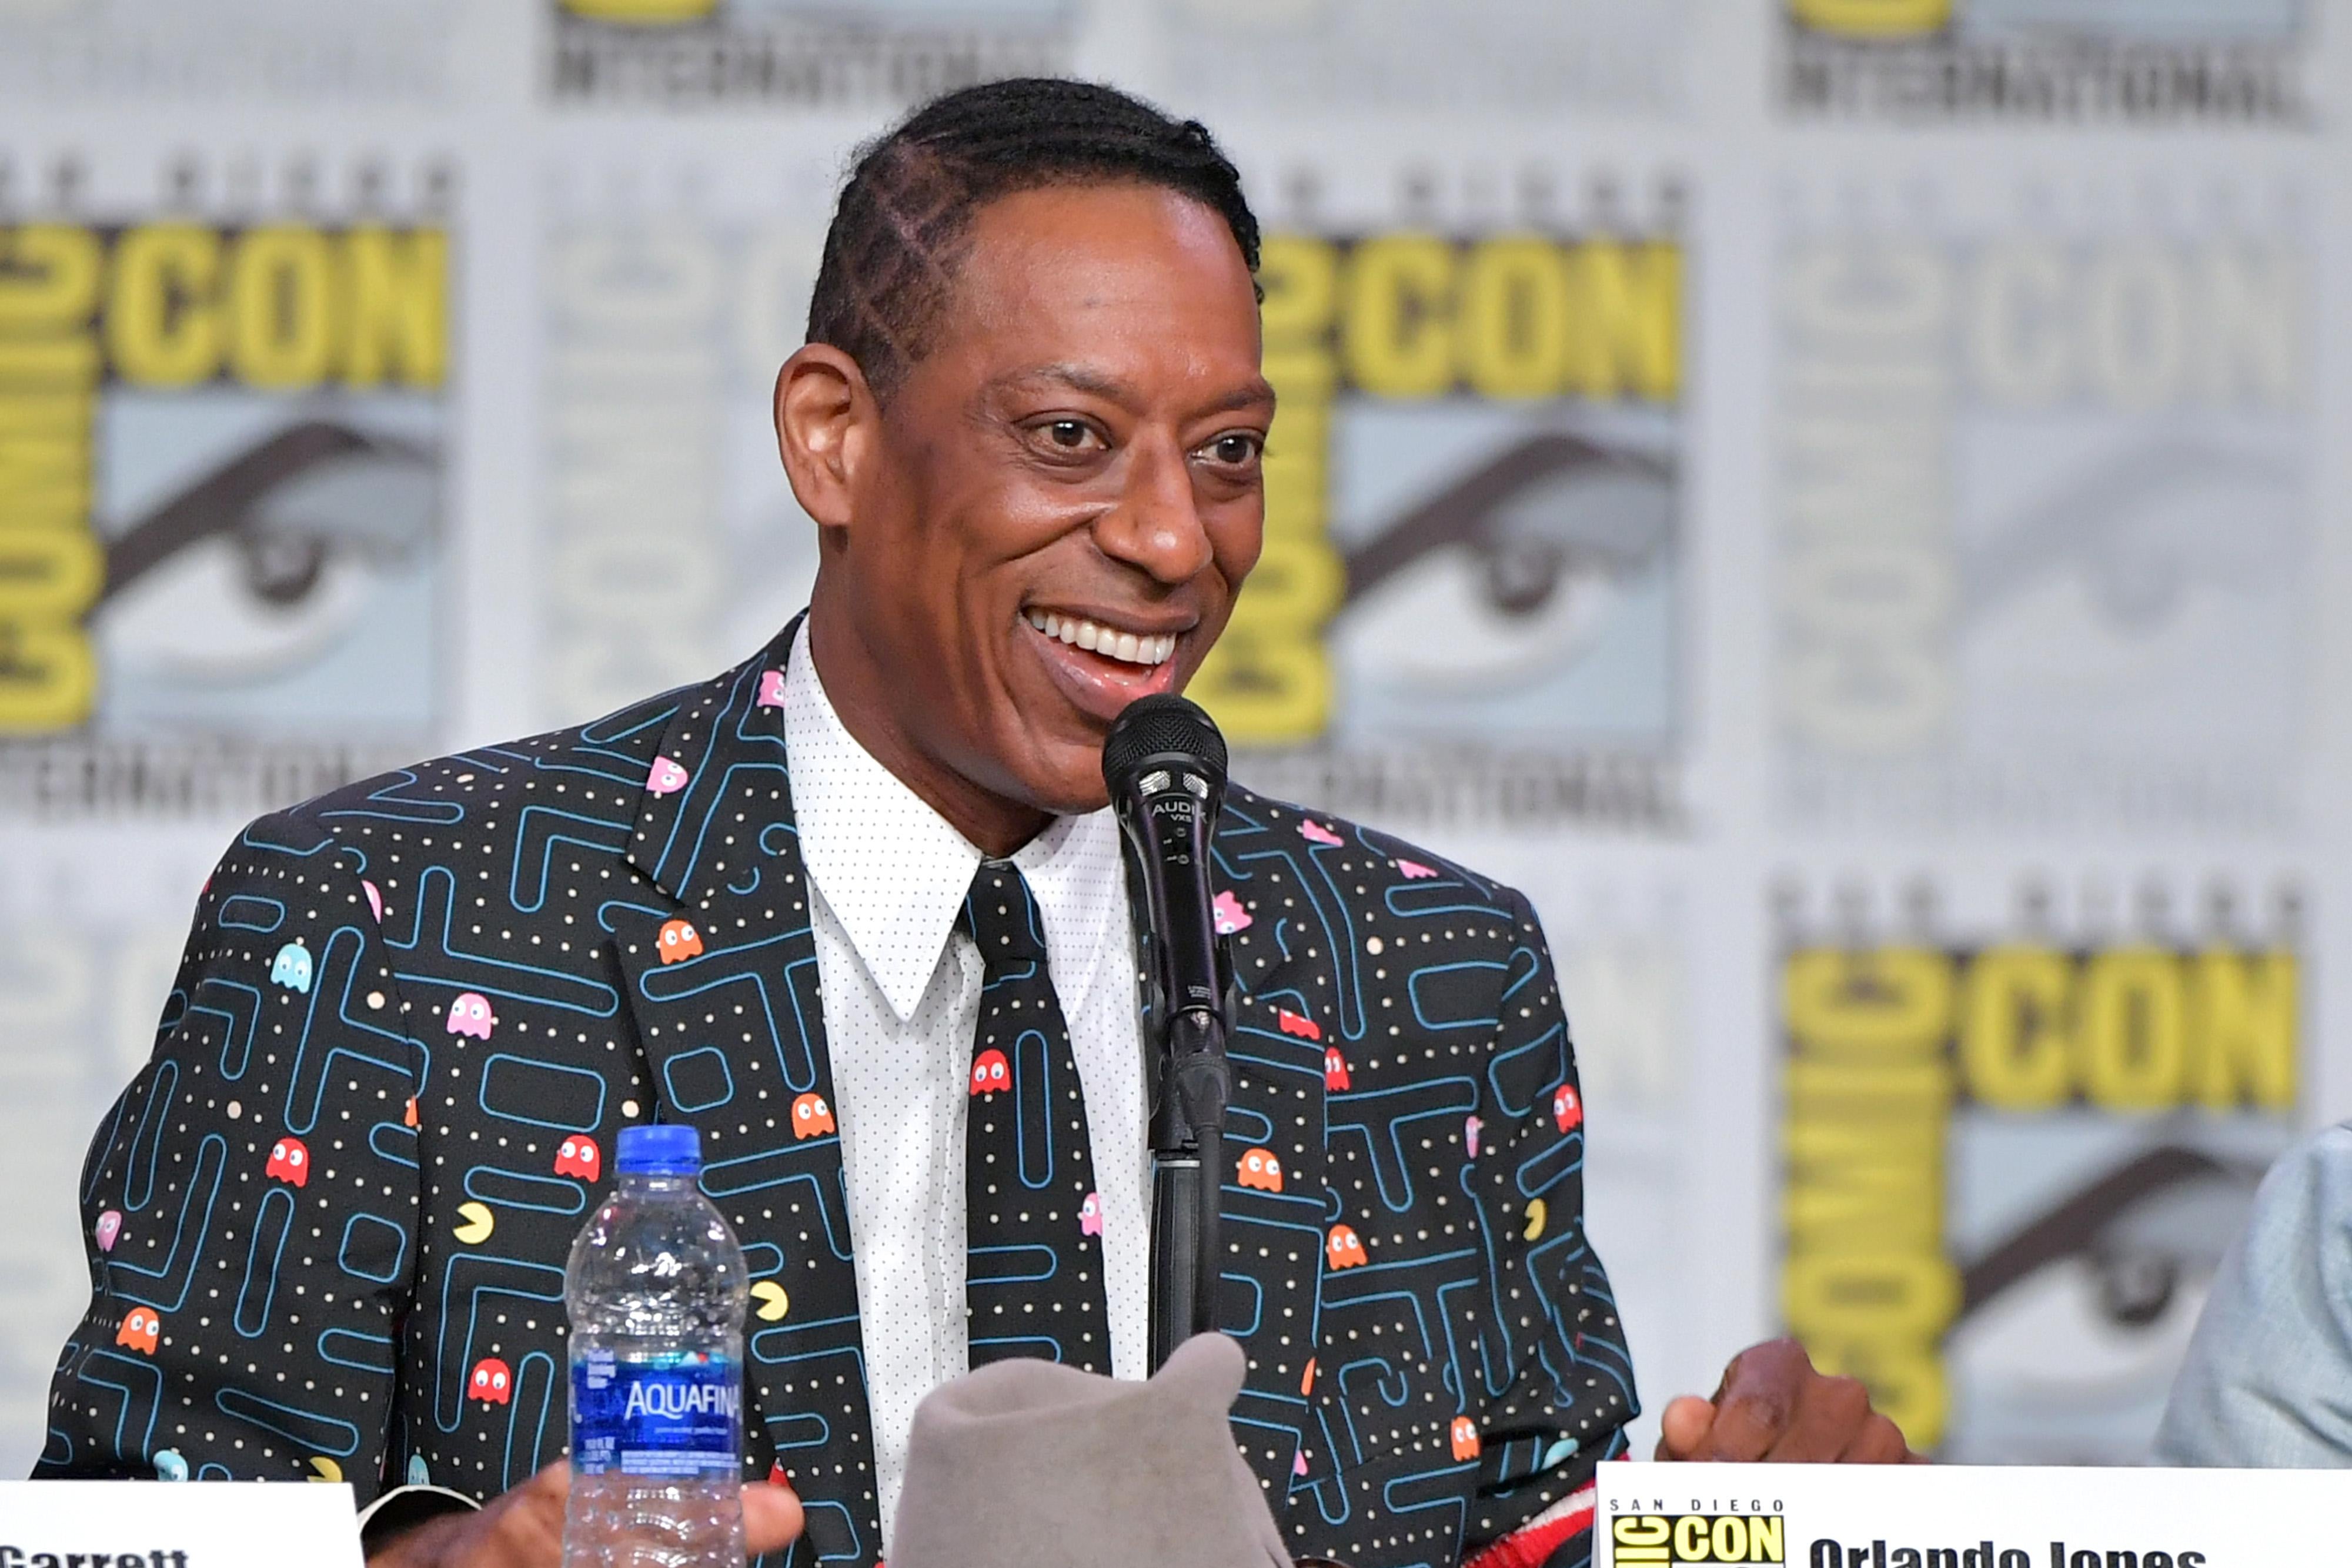 Orlando Jones, wearing a suit jacket with a Pac-Man maze on it, sits at a panel table before a Comic-Con logo backtrop, smiling broadly. 